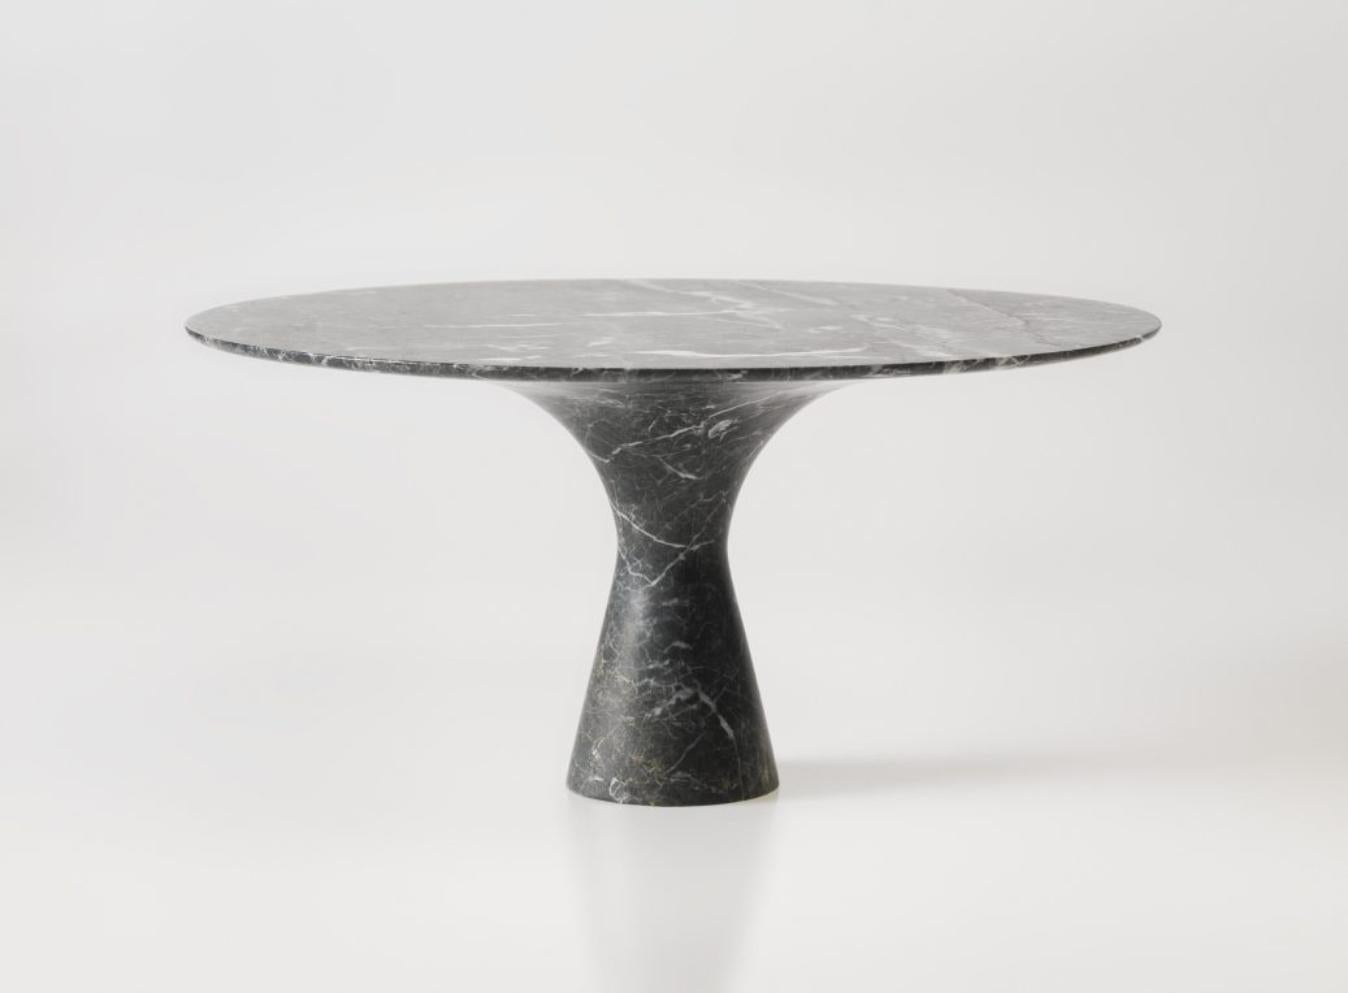 Grey Saint Laurent Refined Contemporary marble dining table 180/75
Dimensions: 180 x 75 cm
Materials: grey Saint Laurent

Angelo is the essence of a round table in natural stone, a sculptural shape in robust material with elegant lines and